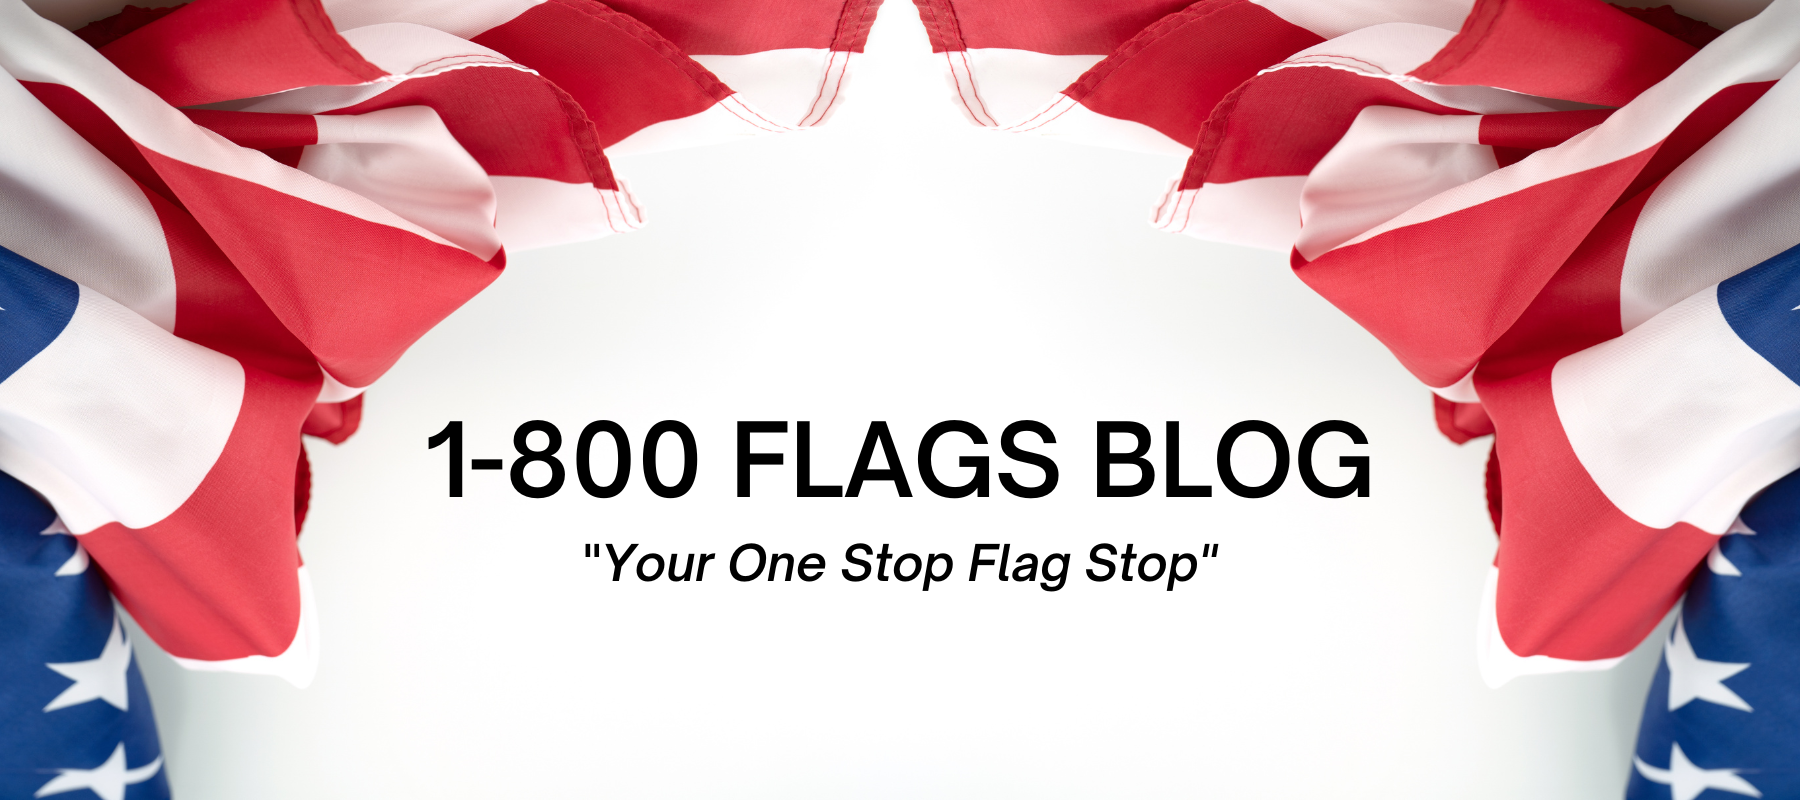 1-800 Flags Blogs about flags tips, flag information